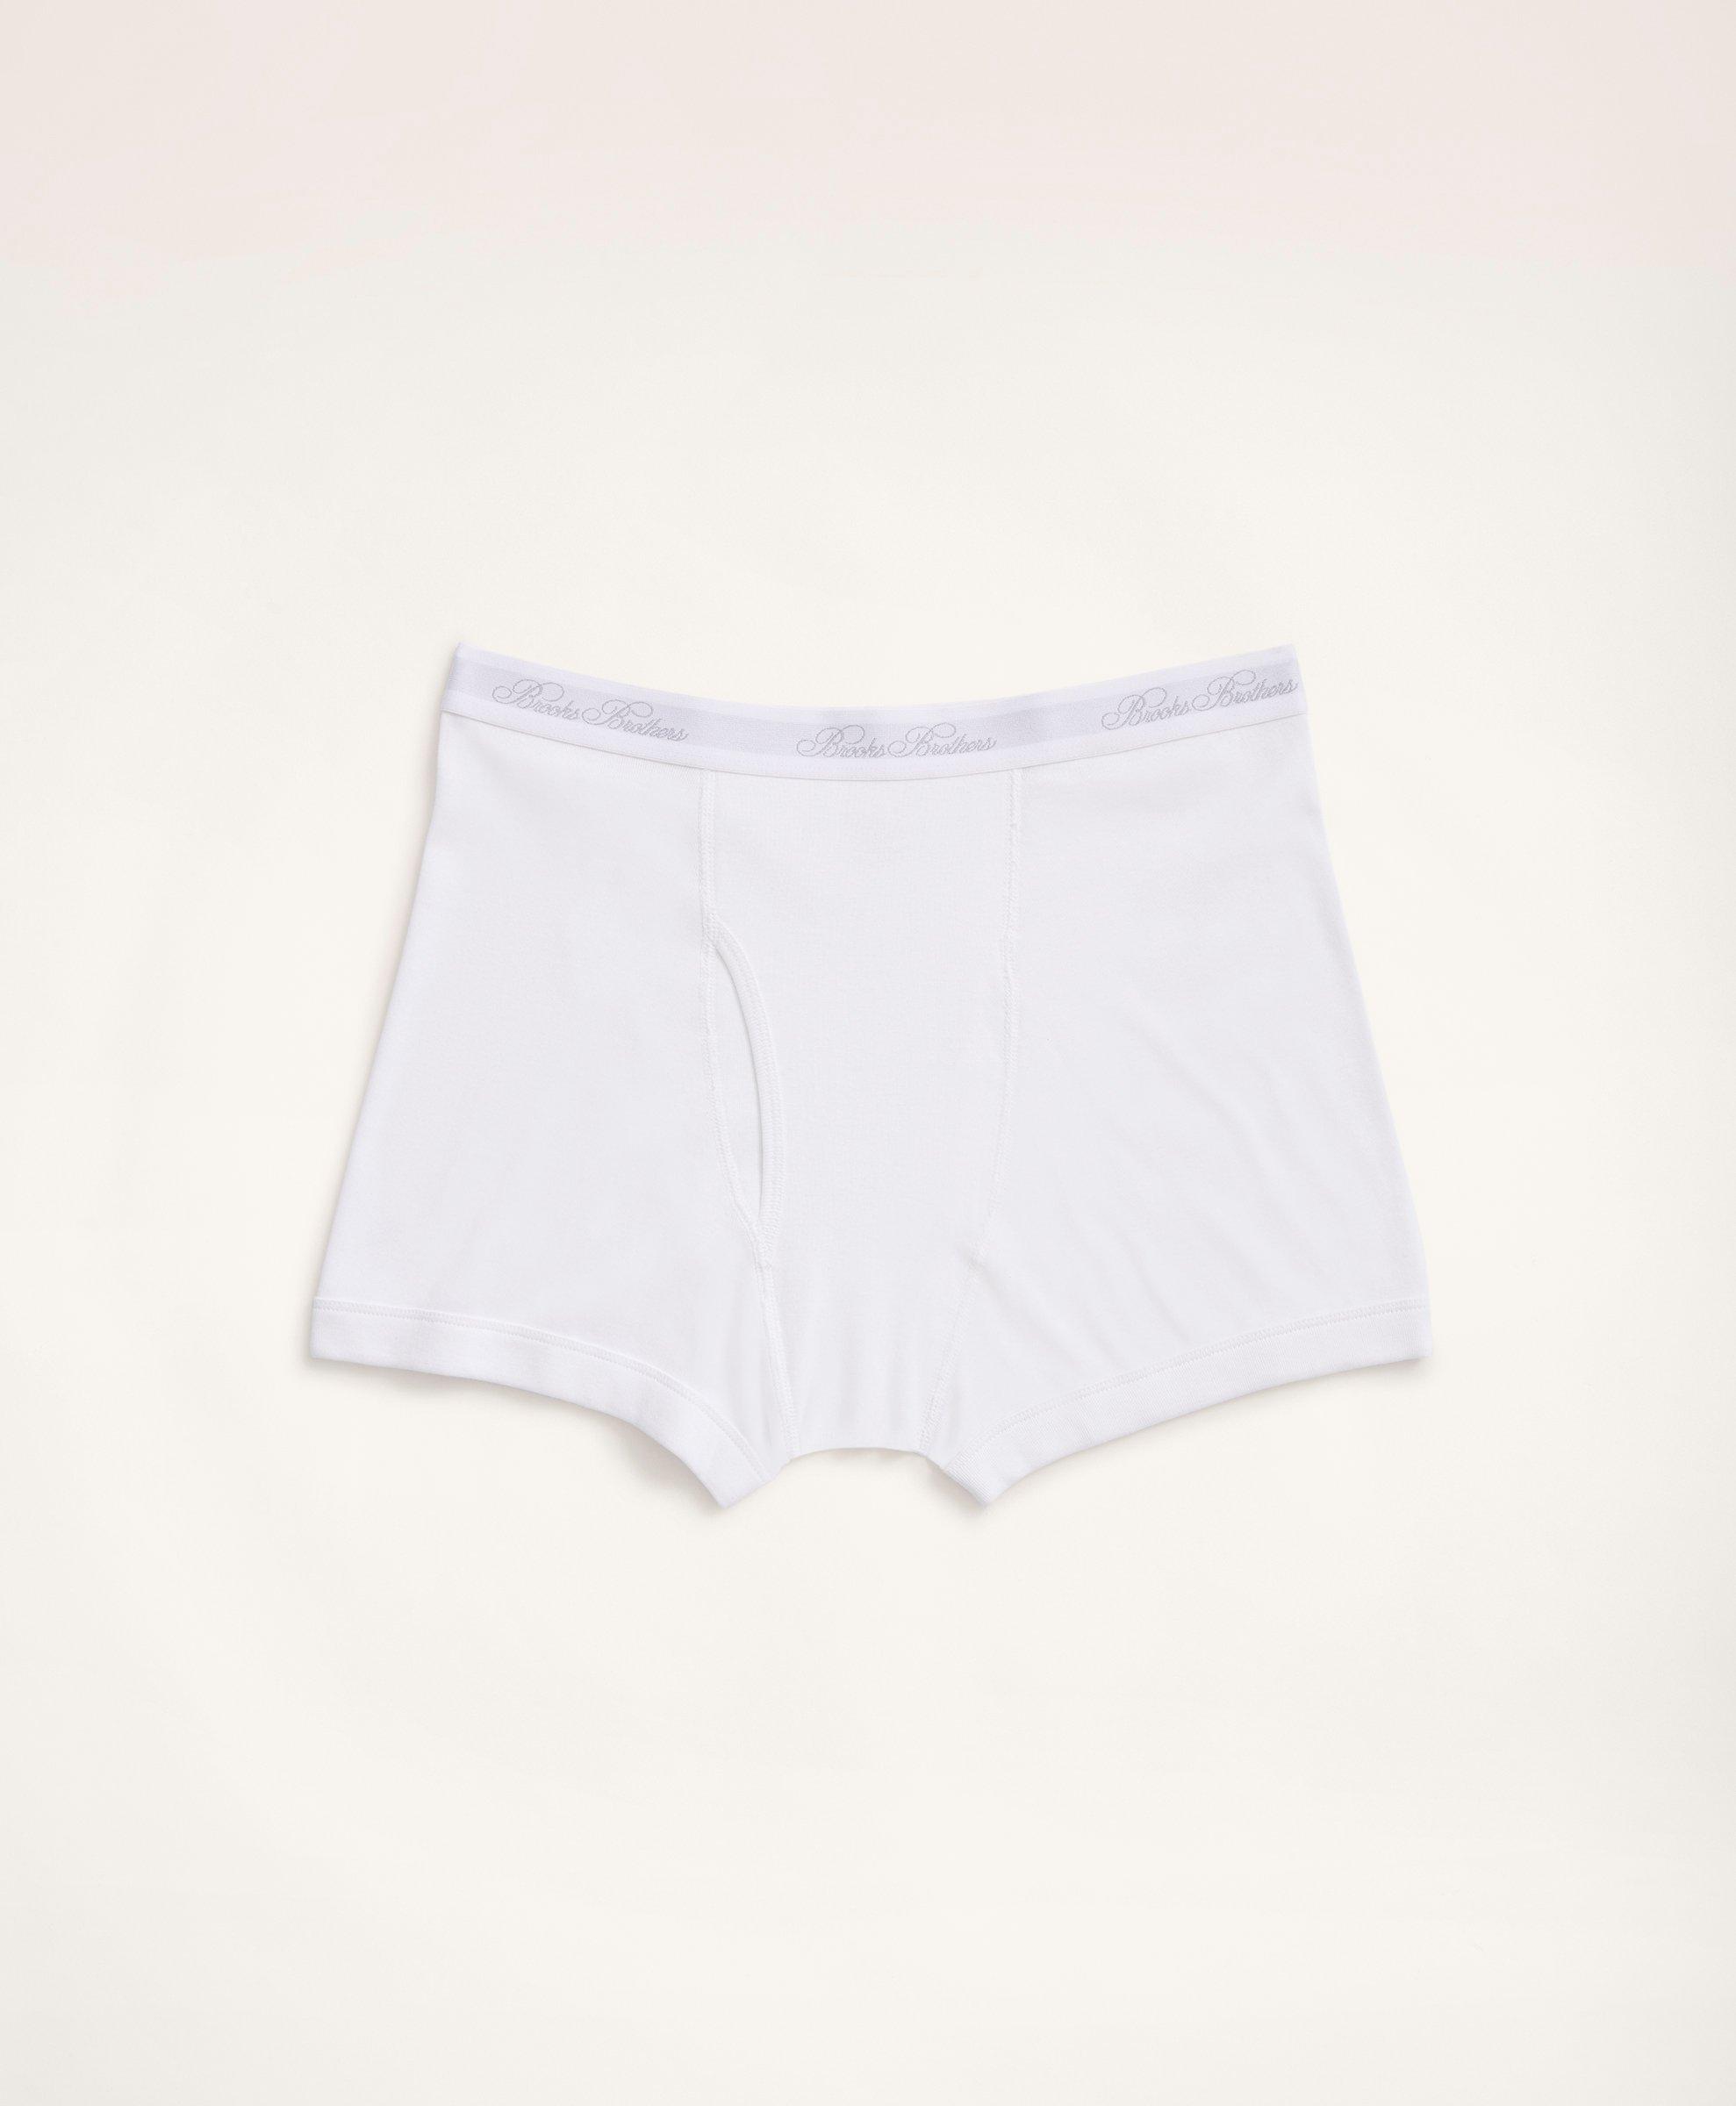 Brooks Brothers Supima Cotton Boxer Briefs-3 Pack | White | Size 2xl